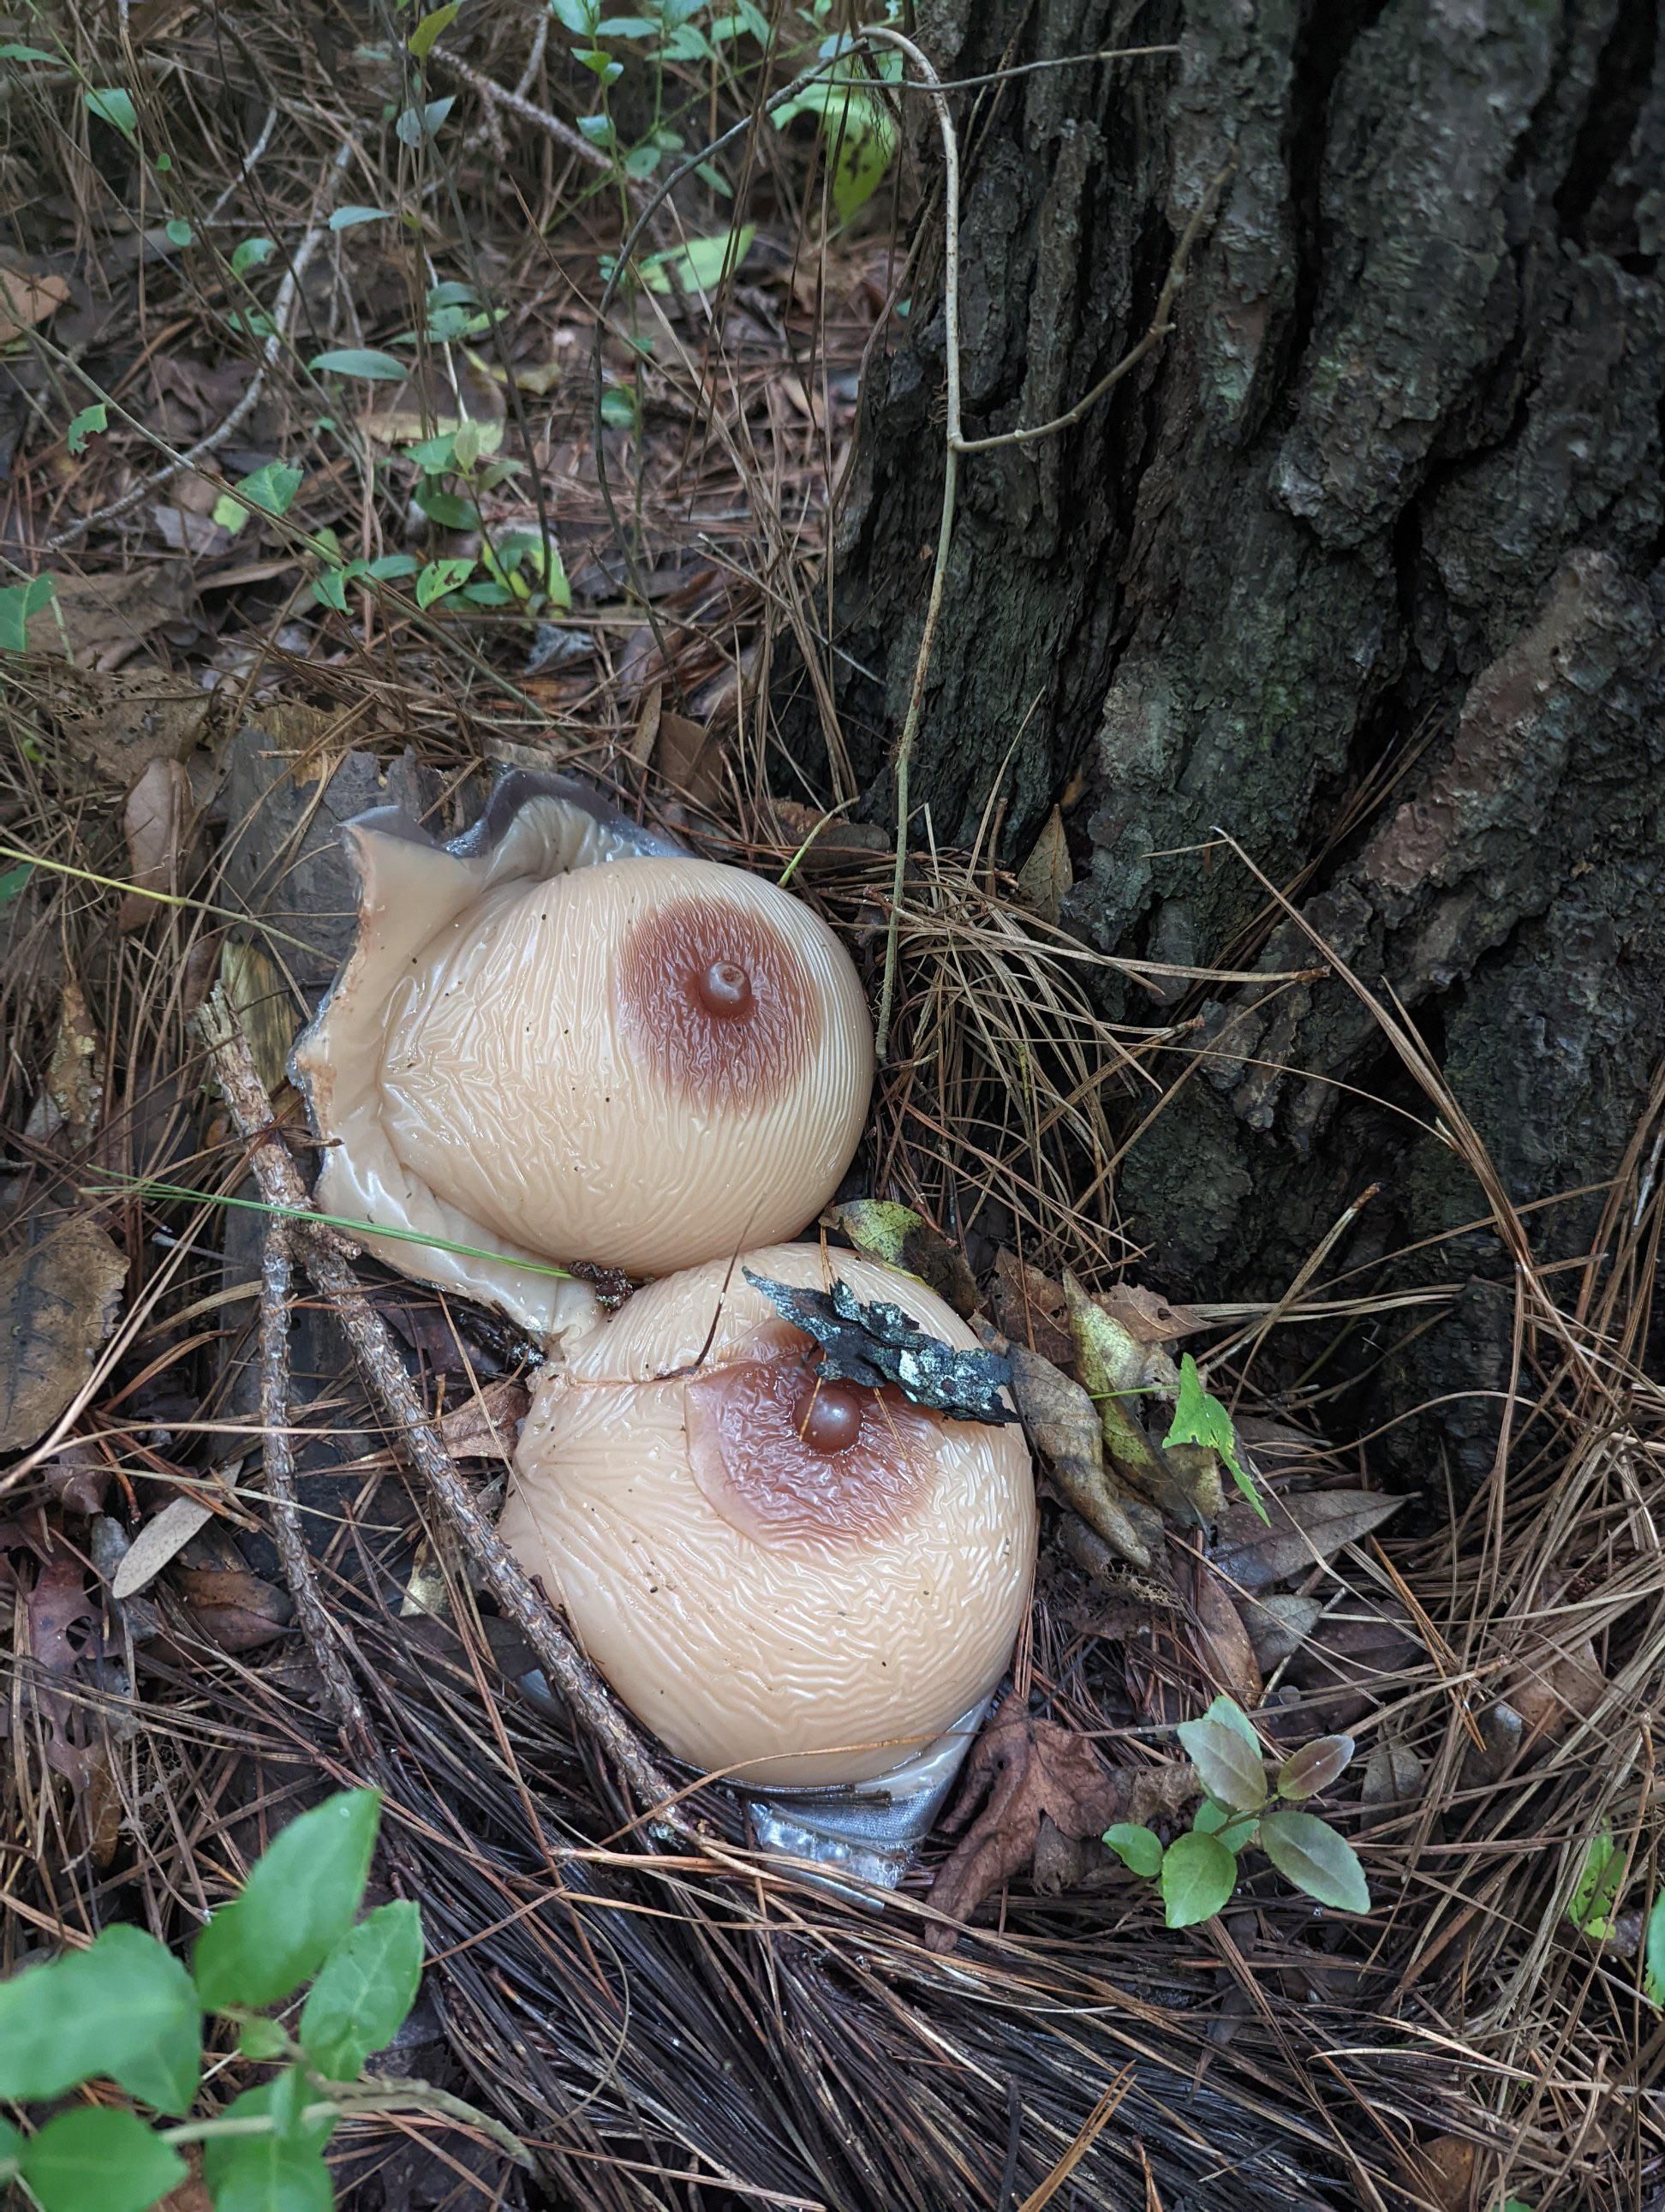 Weirdest mushroom I’ve ever found. Anyone know what kind it is?